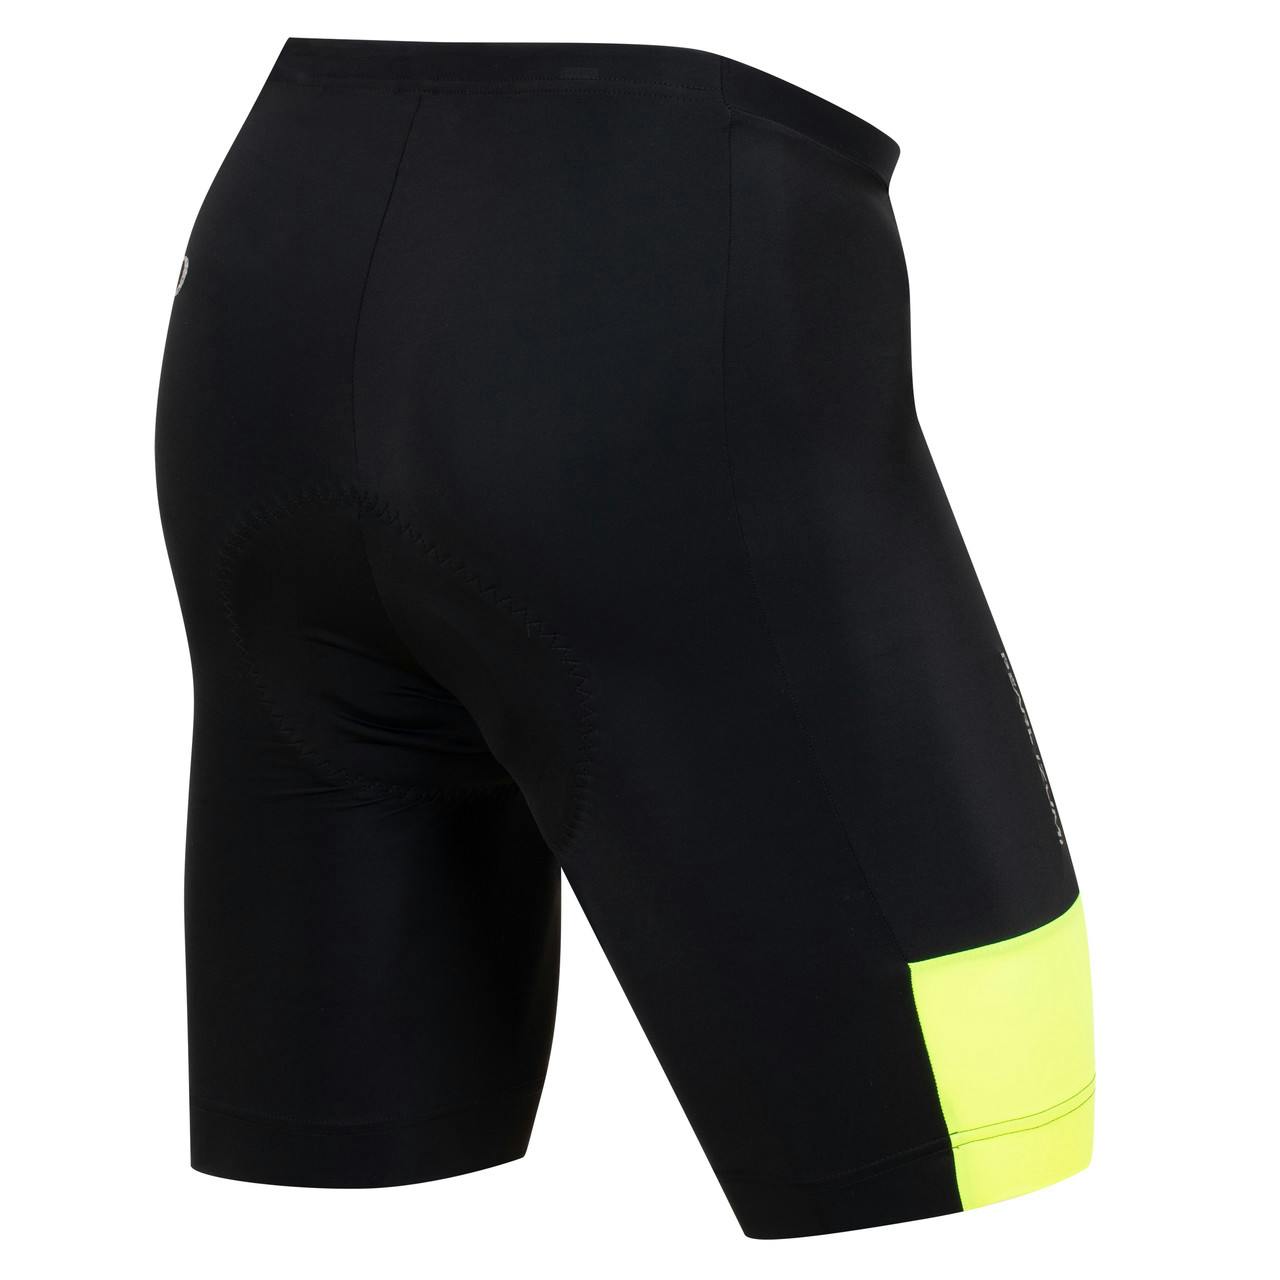 Quest Shorts Black/Screaming Yellow